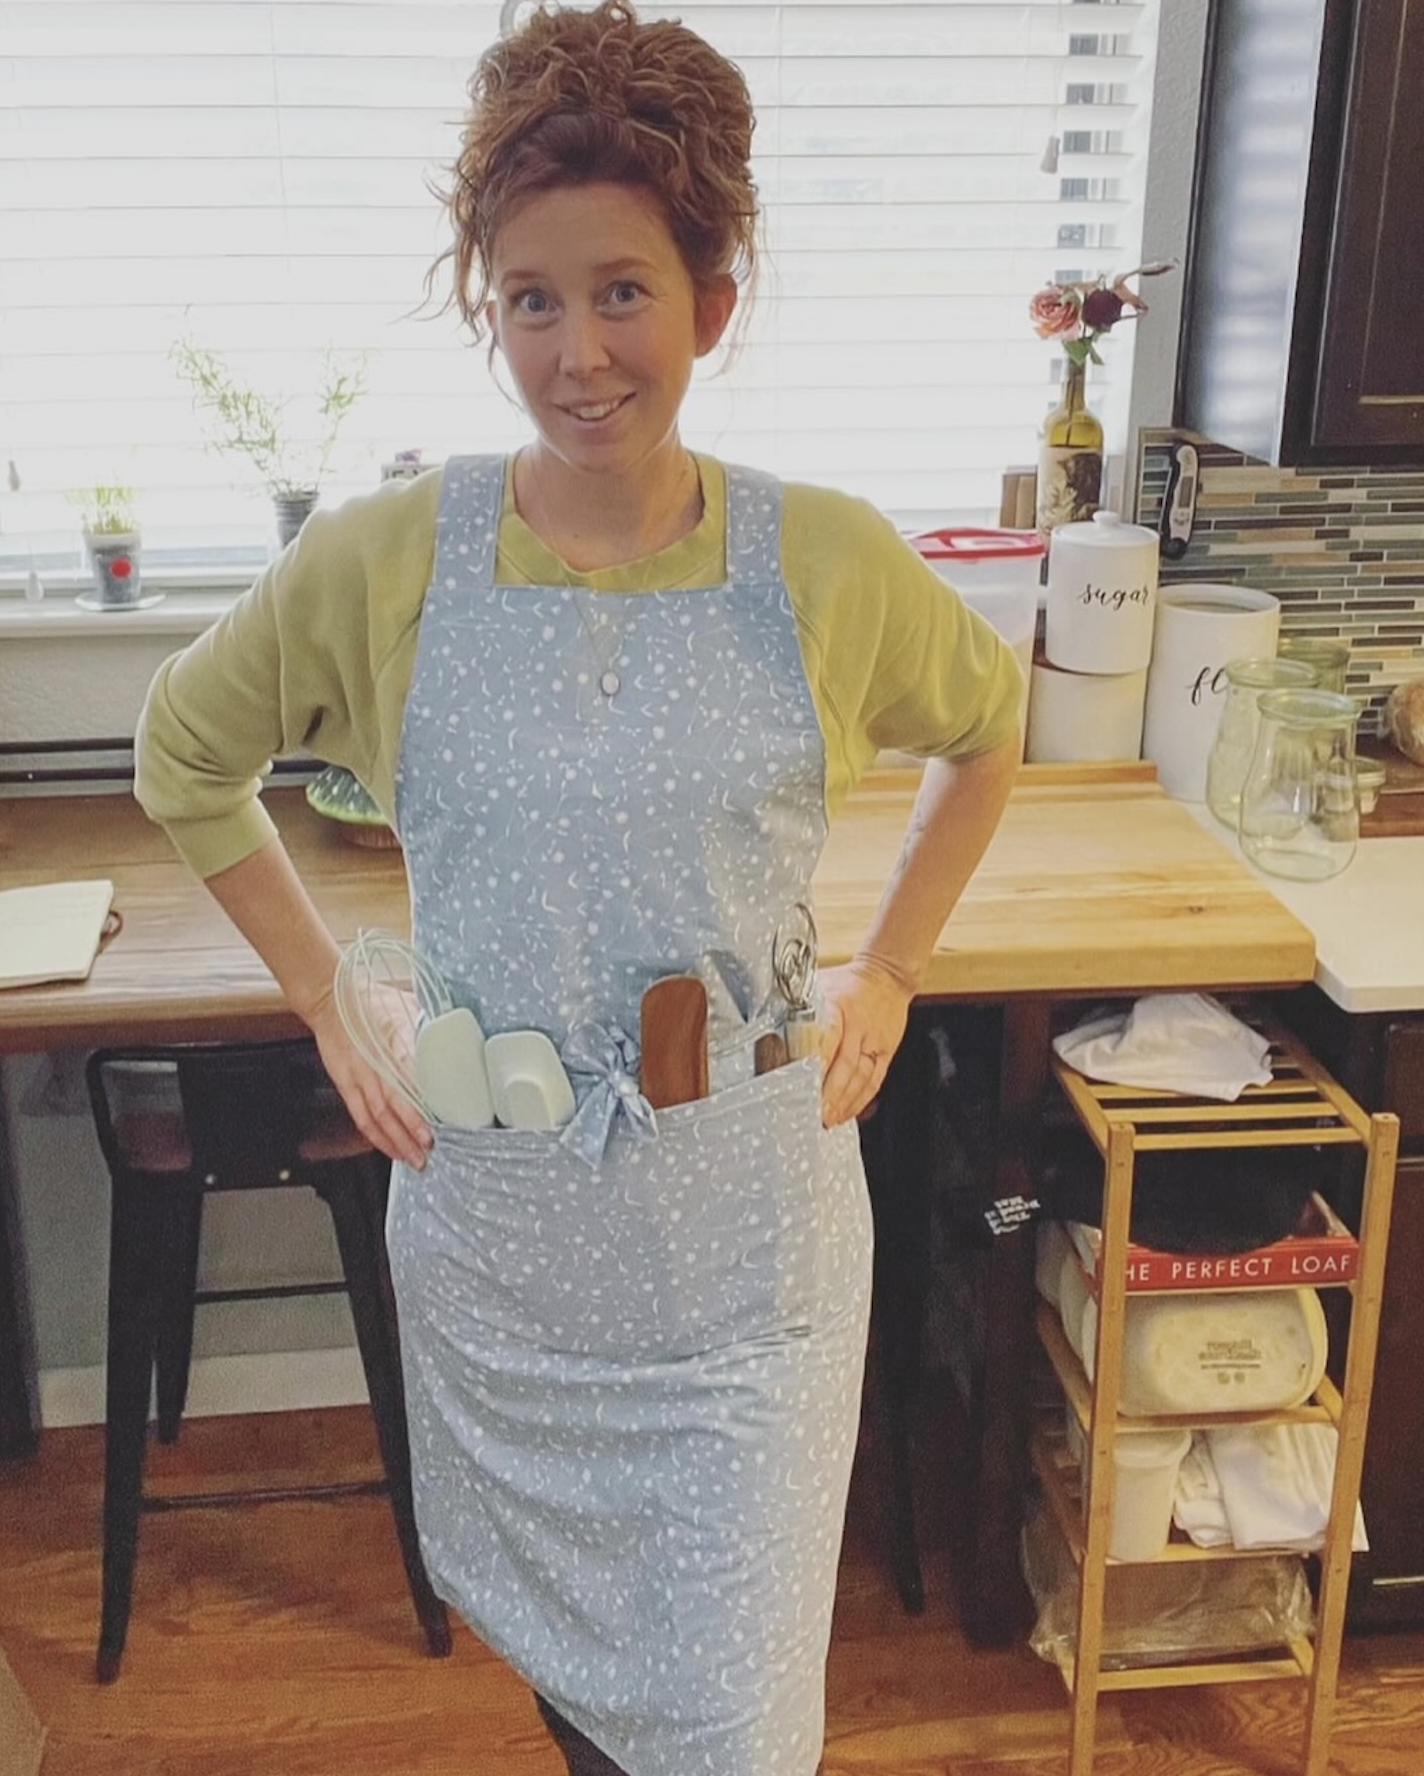 buy reversible handmade vintage fabric aprons online in canada from wild bluebell homestead for sourdough bread baking at home in your kitchen